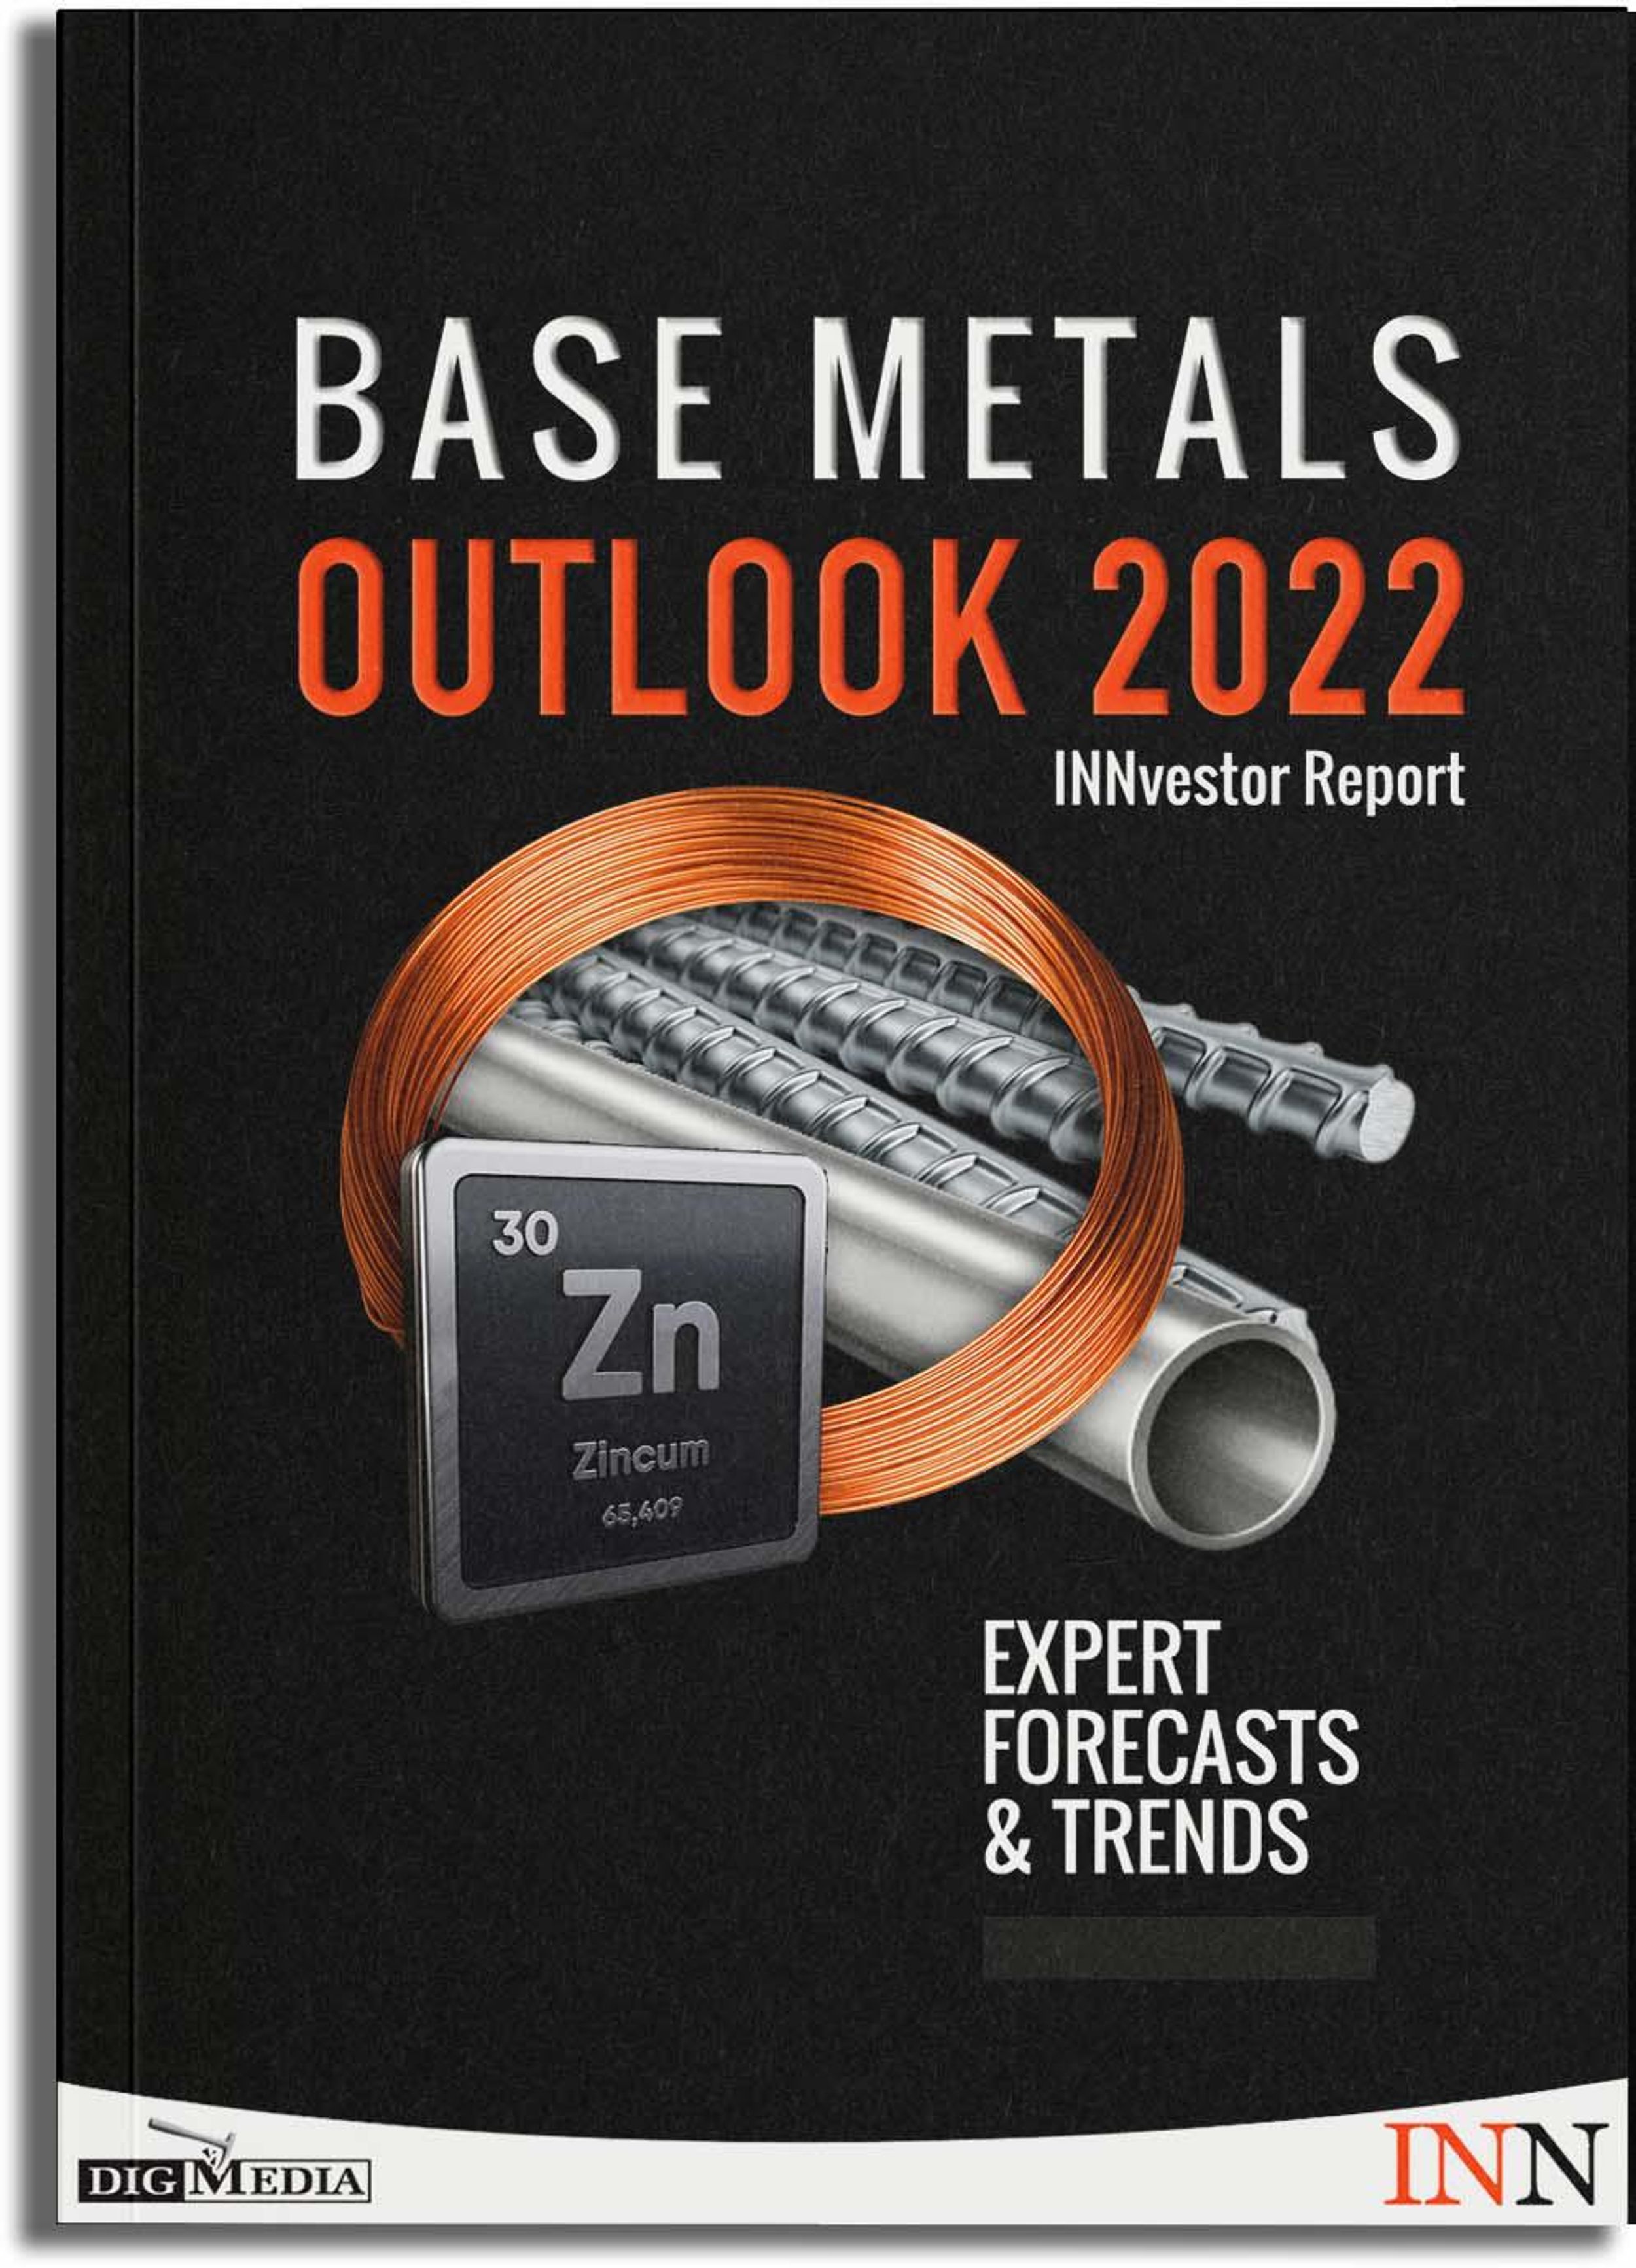 NEW! Download Your FREE 2022 Base Metals Outlook Report